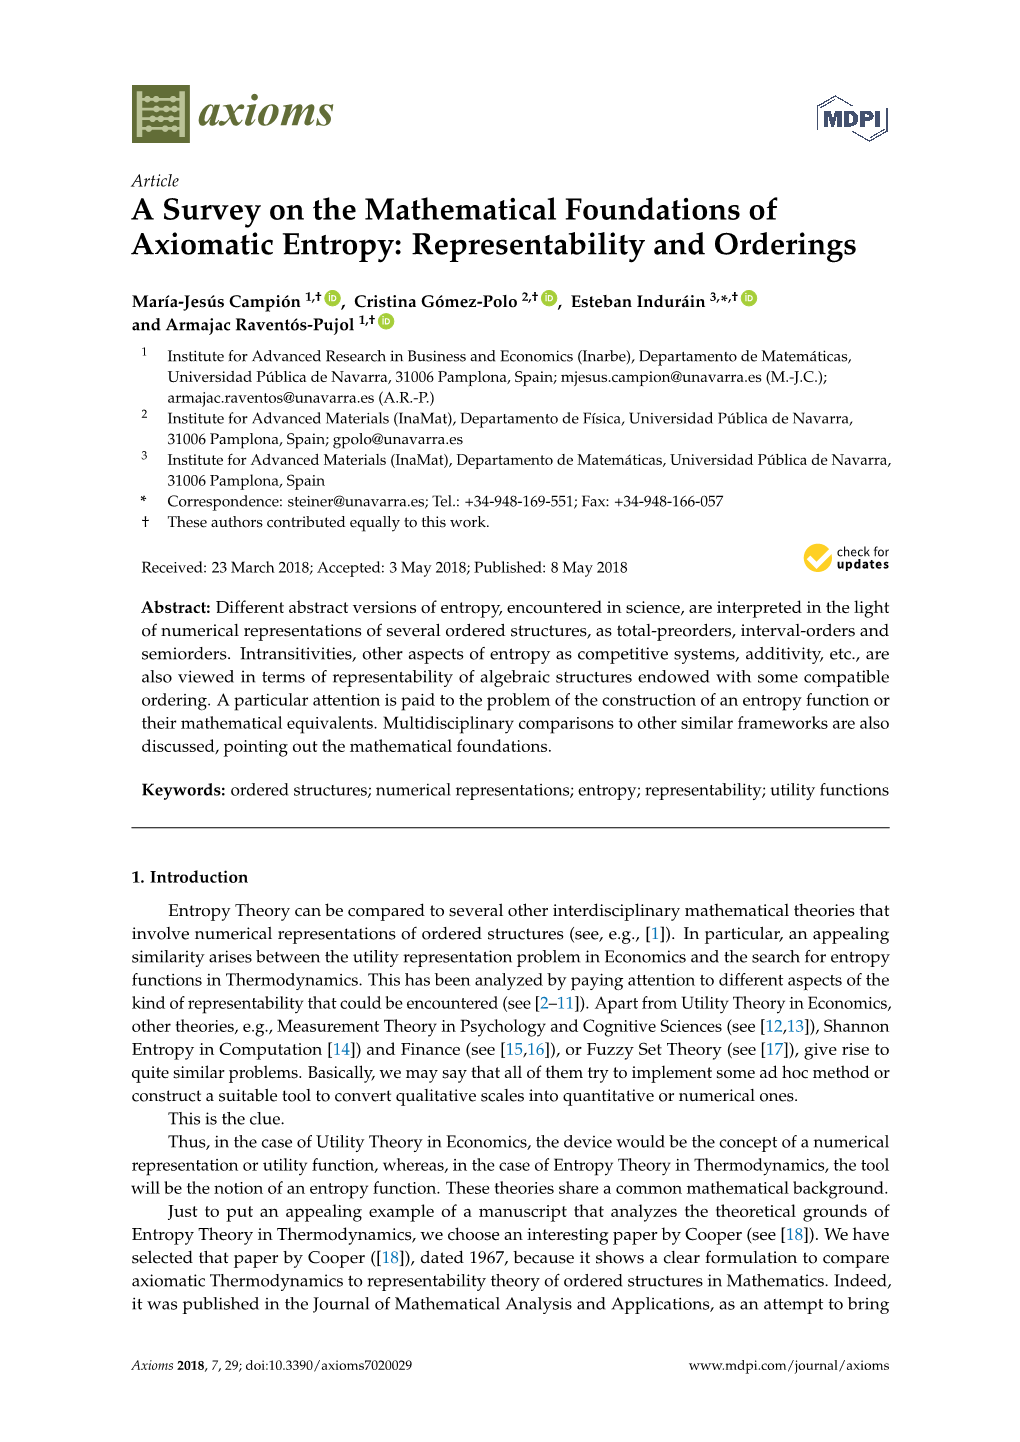 A Survey on the Mathematical Foundations of Axiomatic Entropy: Representability and Orderings